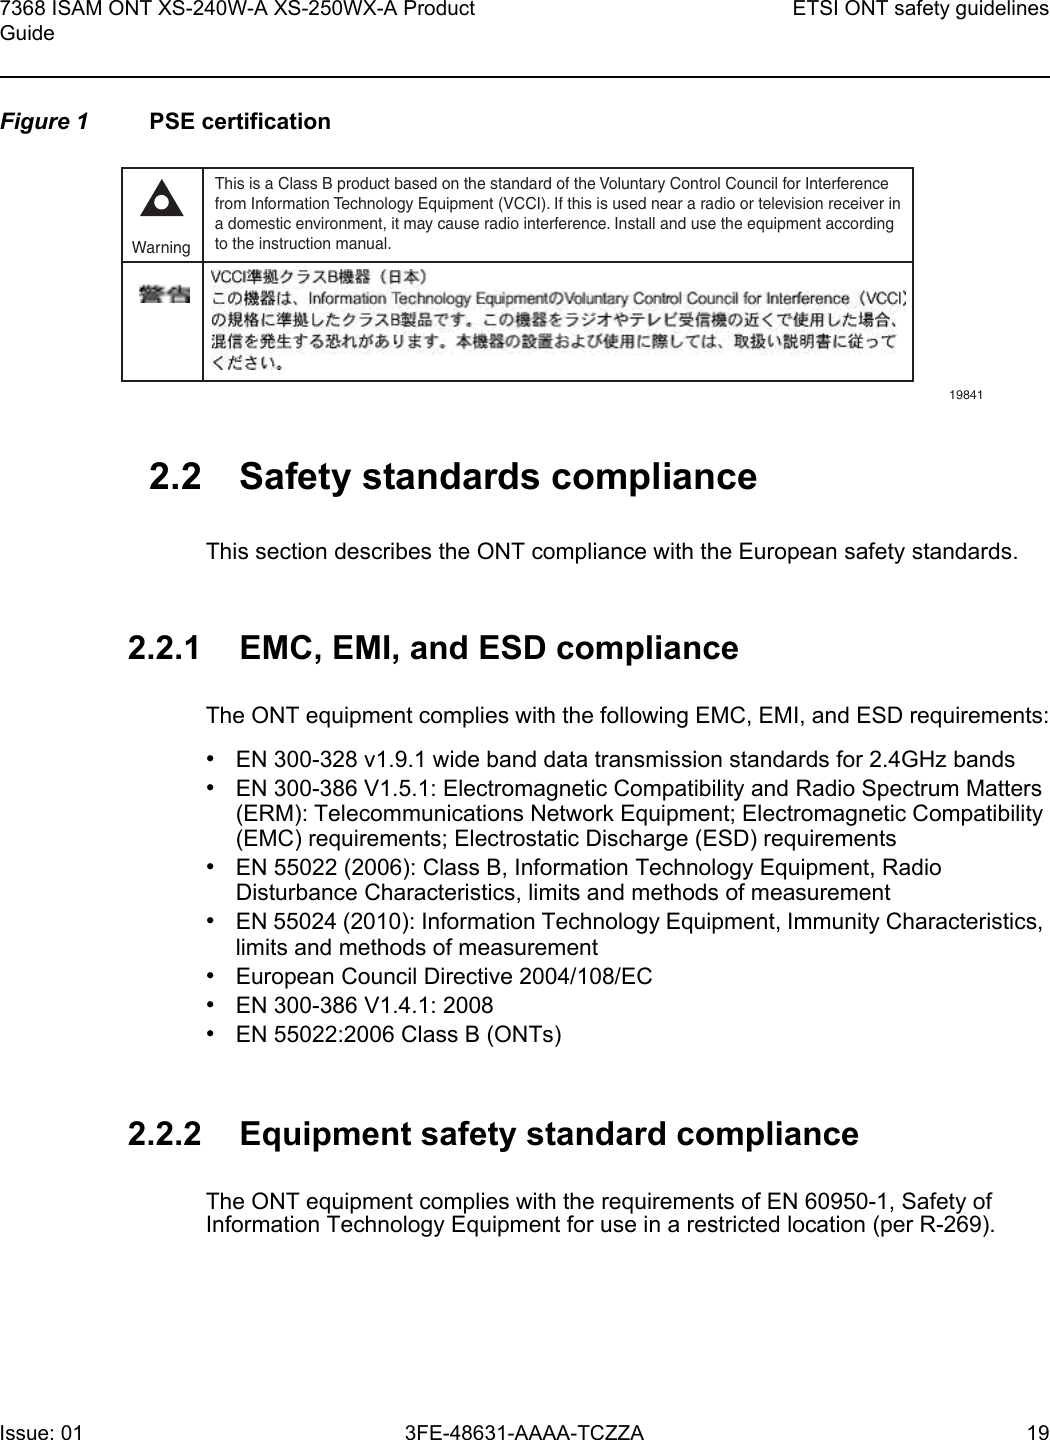 7368 ISAM ONT XS-240W-A XS-250WX-A Product GuideETSI ONT safety guidelinesIssue: 01 3FE-48631-AAAA-TCZZA 19 Figure 1 PSE certification2.2 Safety standards complianceThis section describes the ONT compliance with the European safety standards.2.2.1 EMC, EMI, and ESD complianceThe ONT equipment complies with the following EMC, EMI, and ESD requirements:•EN 300-328 v1.9.1 wide band data transmission standards for 2.4GHz bands•EN 300-386 V1.5.1: Electromagnetic Compatibility and Radio Spectrum Matters (ERM): Telecommunications Network Equipment; Electromagnetic Compatibility (EMC) requirements; Electrostatic Discharge (ESD) requirements•EN 55022 (2006): Class B, Information Technology Equipment, Radio Disturbance Characteristics, limits and methods of measurement•EN 55024 (2010): Information Technology Equipment, Immunity Characteristics, limits and methods of measurement•European Council Directive 2004/108/EC•EN 300-386 V1.4.1: 2008•EN 55022:2006 Class B (ONTs)2.2.2 Equipment safety standard complianceThe ONT equipment complies with the requirements of EN 60950-1, Safety of Information Technology Equipment for use in a restricted location (per R-269).This is a Class B product based on the standard of the Voluntary Control Council for Interferencefrom Information Technology Equipment (VCCI). If this is used near a radio or television receiver ina domestic environment, it may cause radio interference. Install and use the equipment accordingto the instruction manual. Warning19841